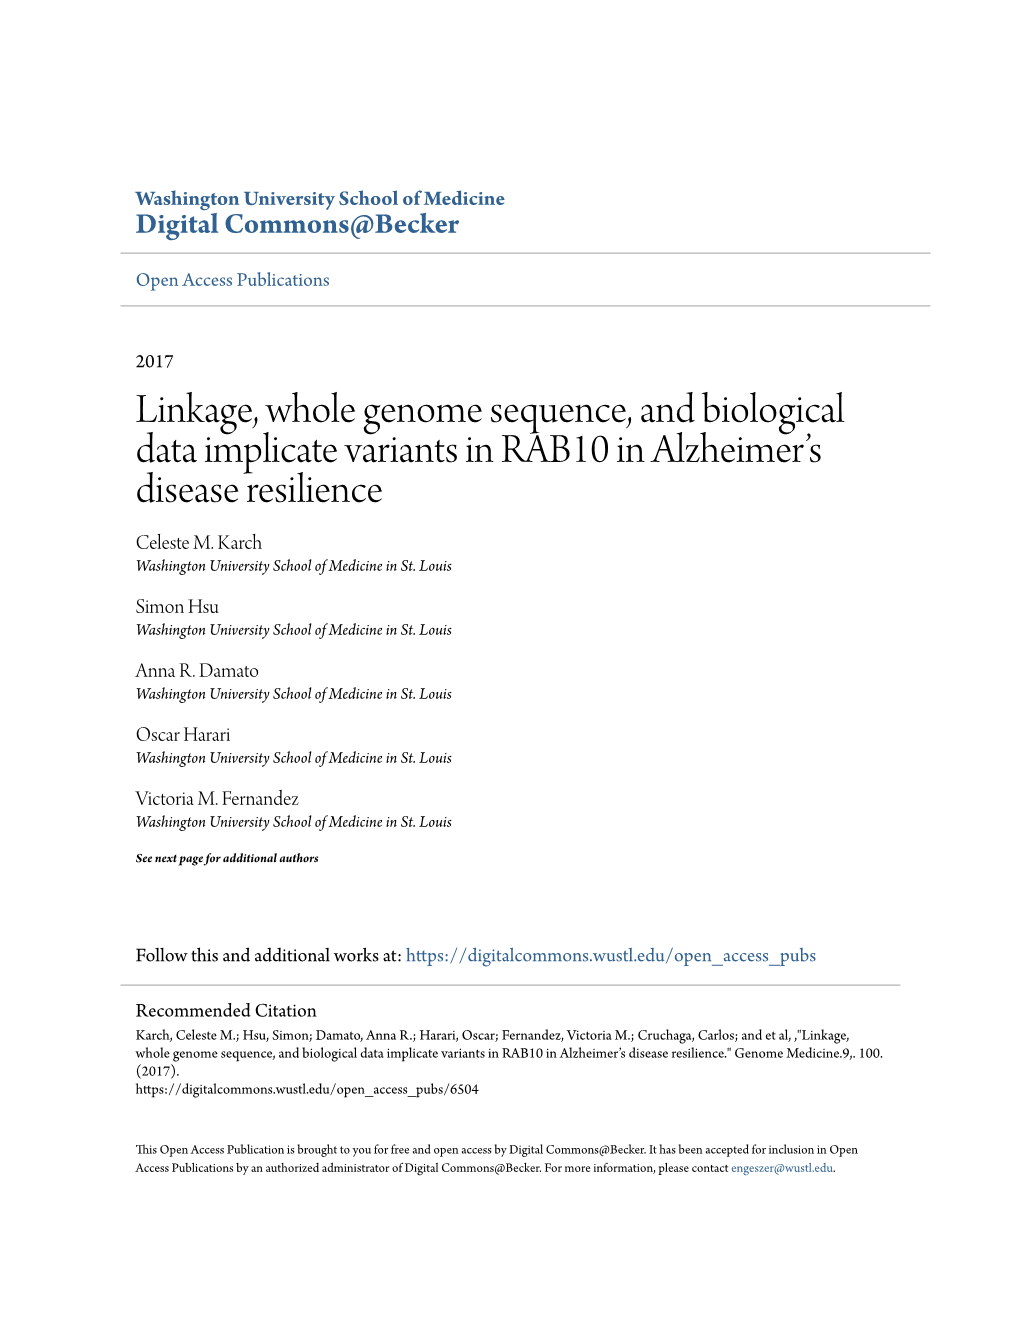 Linkage, Whole Genome Sequence, and Biological Data Implicate Variants in RAB10 in Alzheimer’S Disease Resilience Celeste M